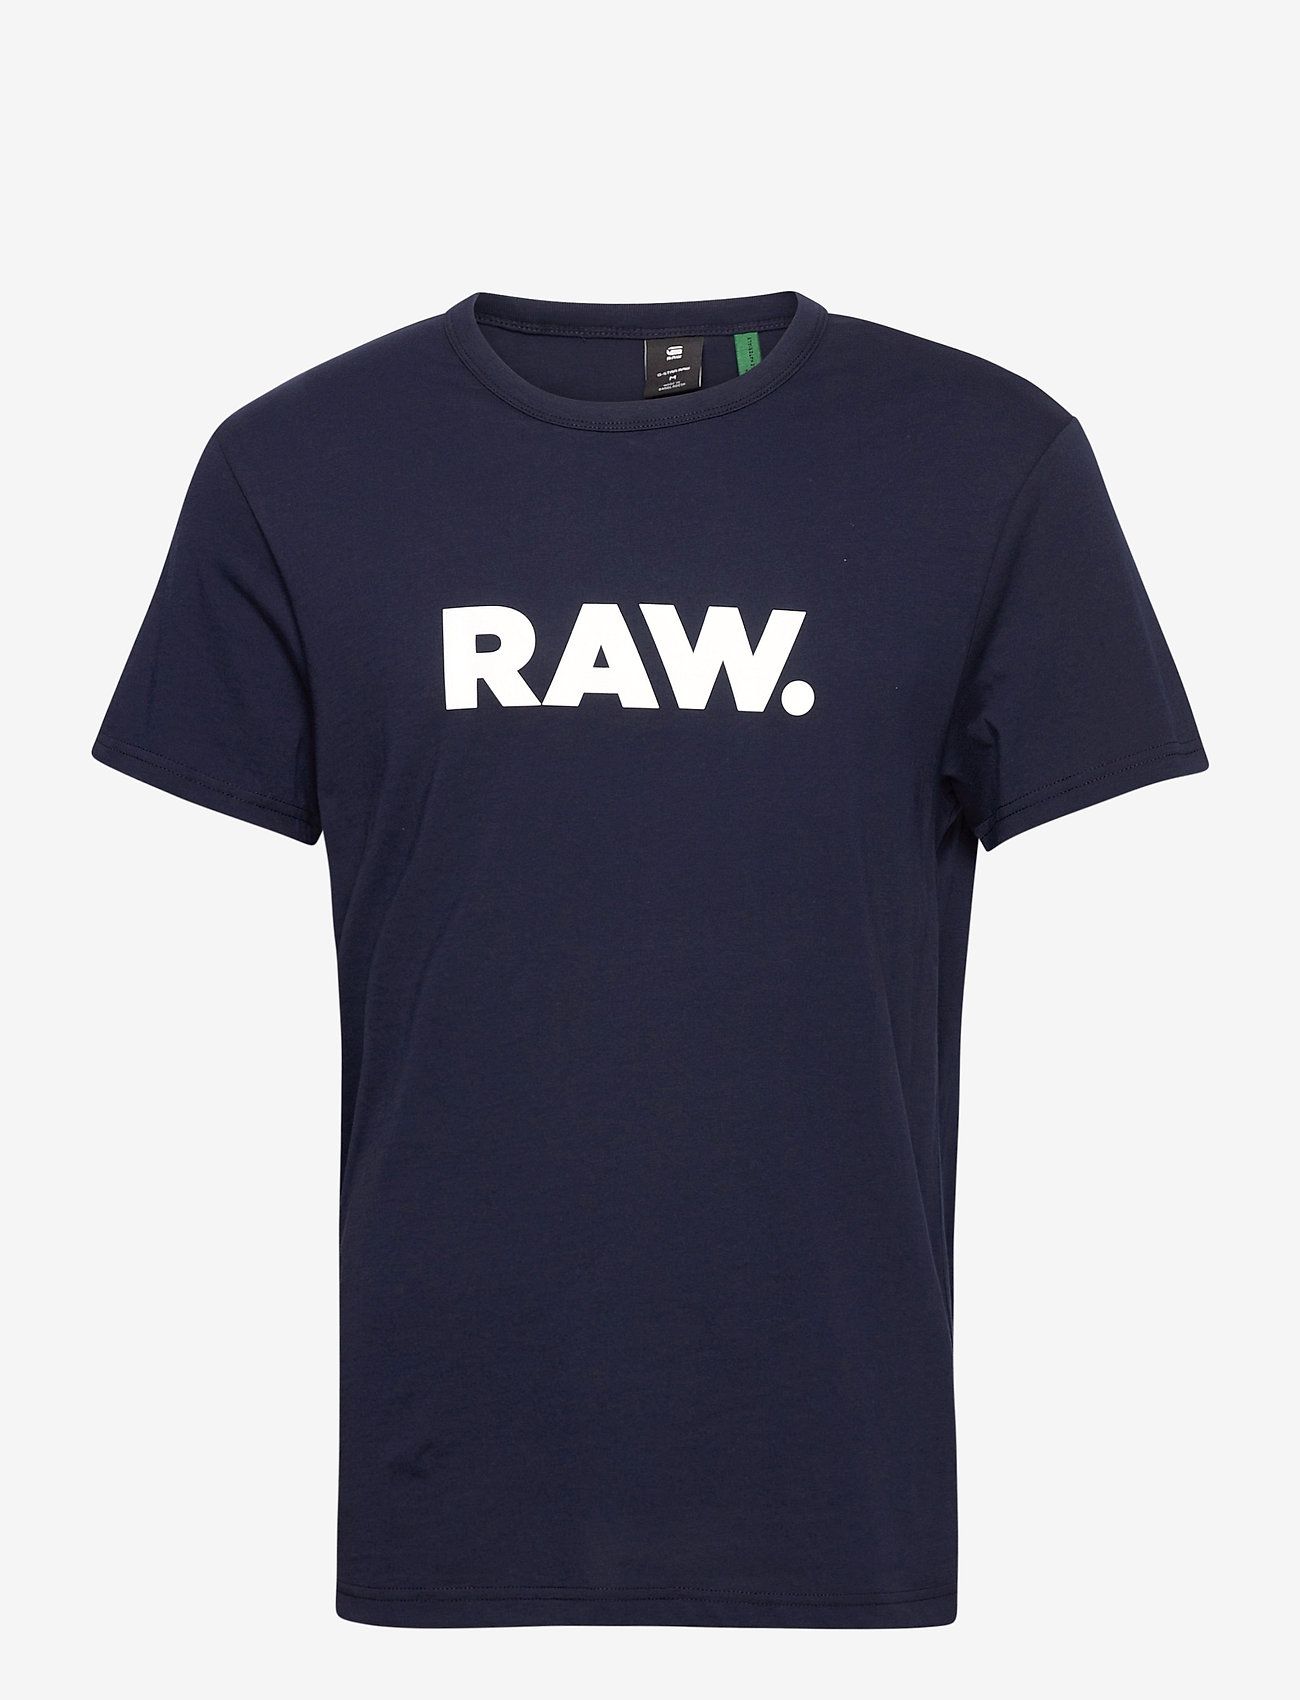 G-Star RAW - Holorn r t s\s - short-sleeved t-shirts - sartho blue - 0